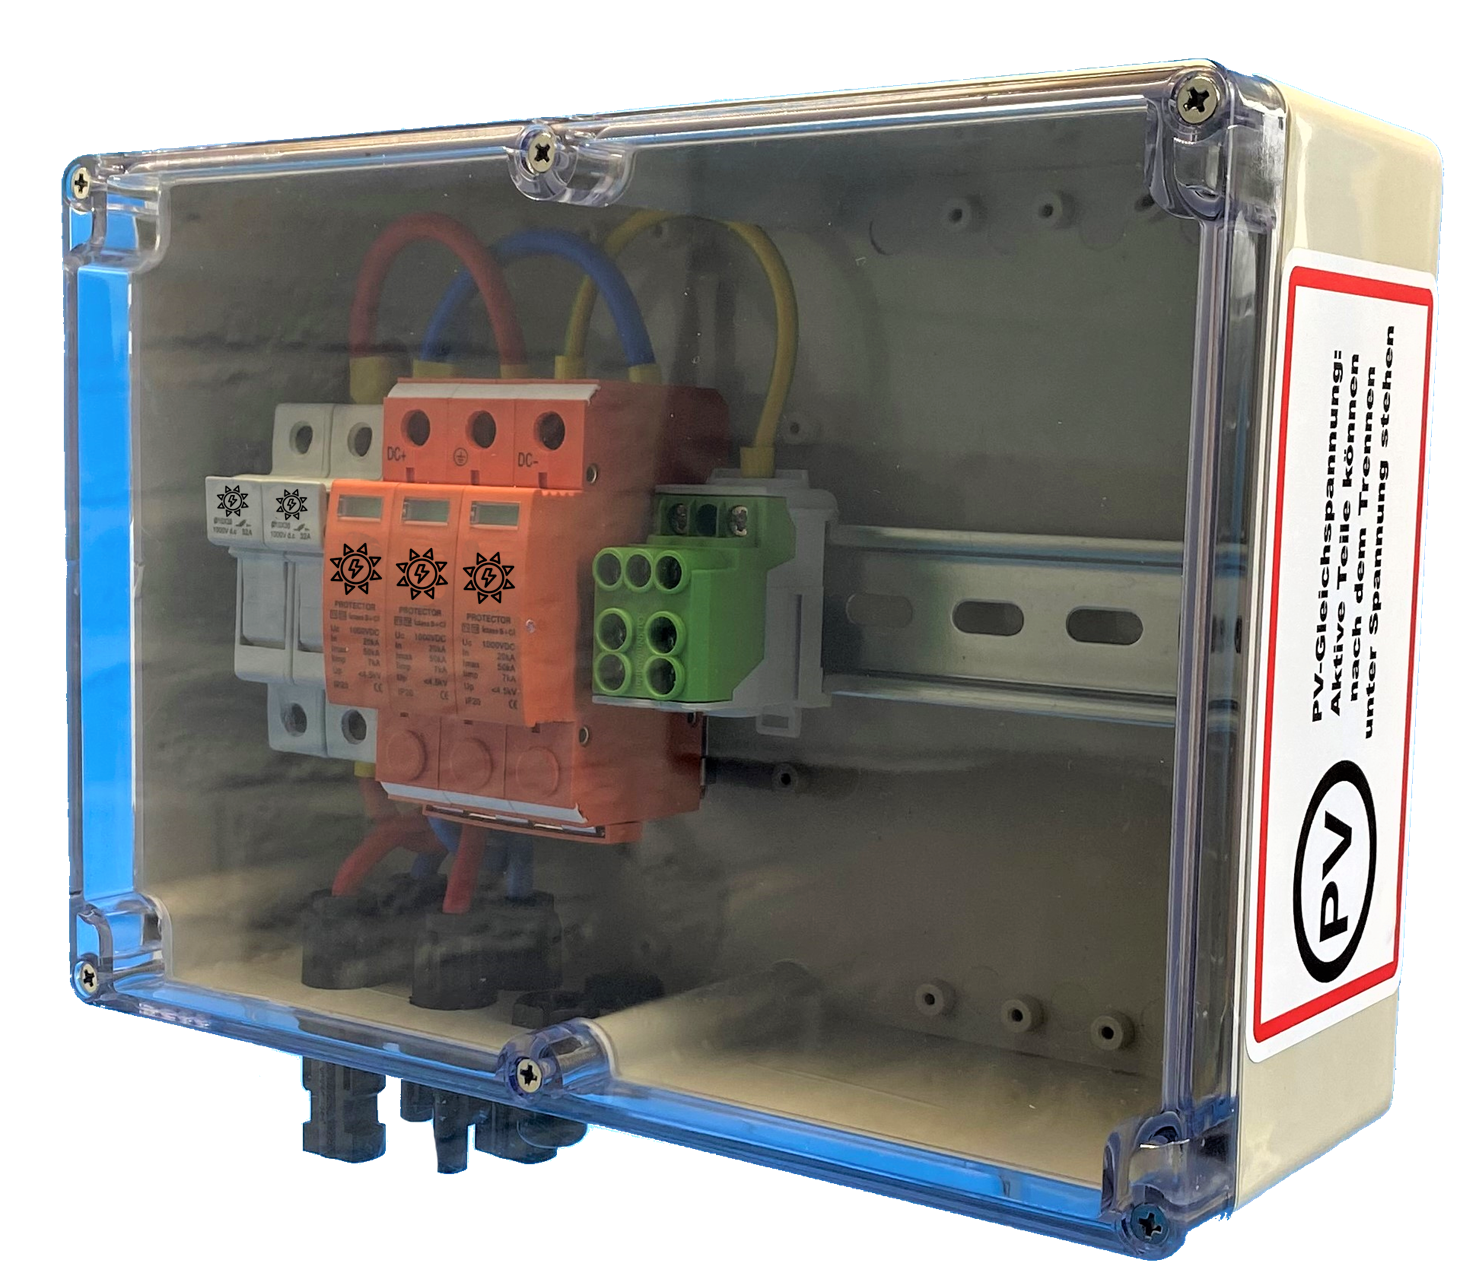 PHOENIX-CONTACT Sunclix / GAK / GENERATOR CONNECTION BOX / DC 1-STRING / Incl. fuse disconnector / T1+T2 / T2 / SURGE PROTECTION